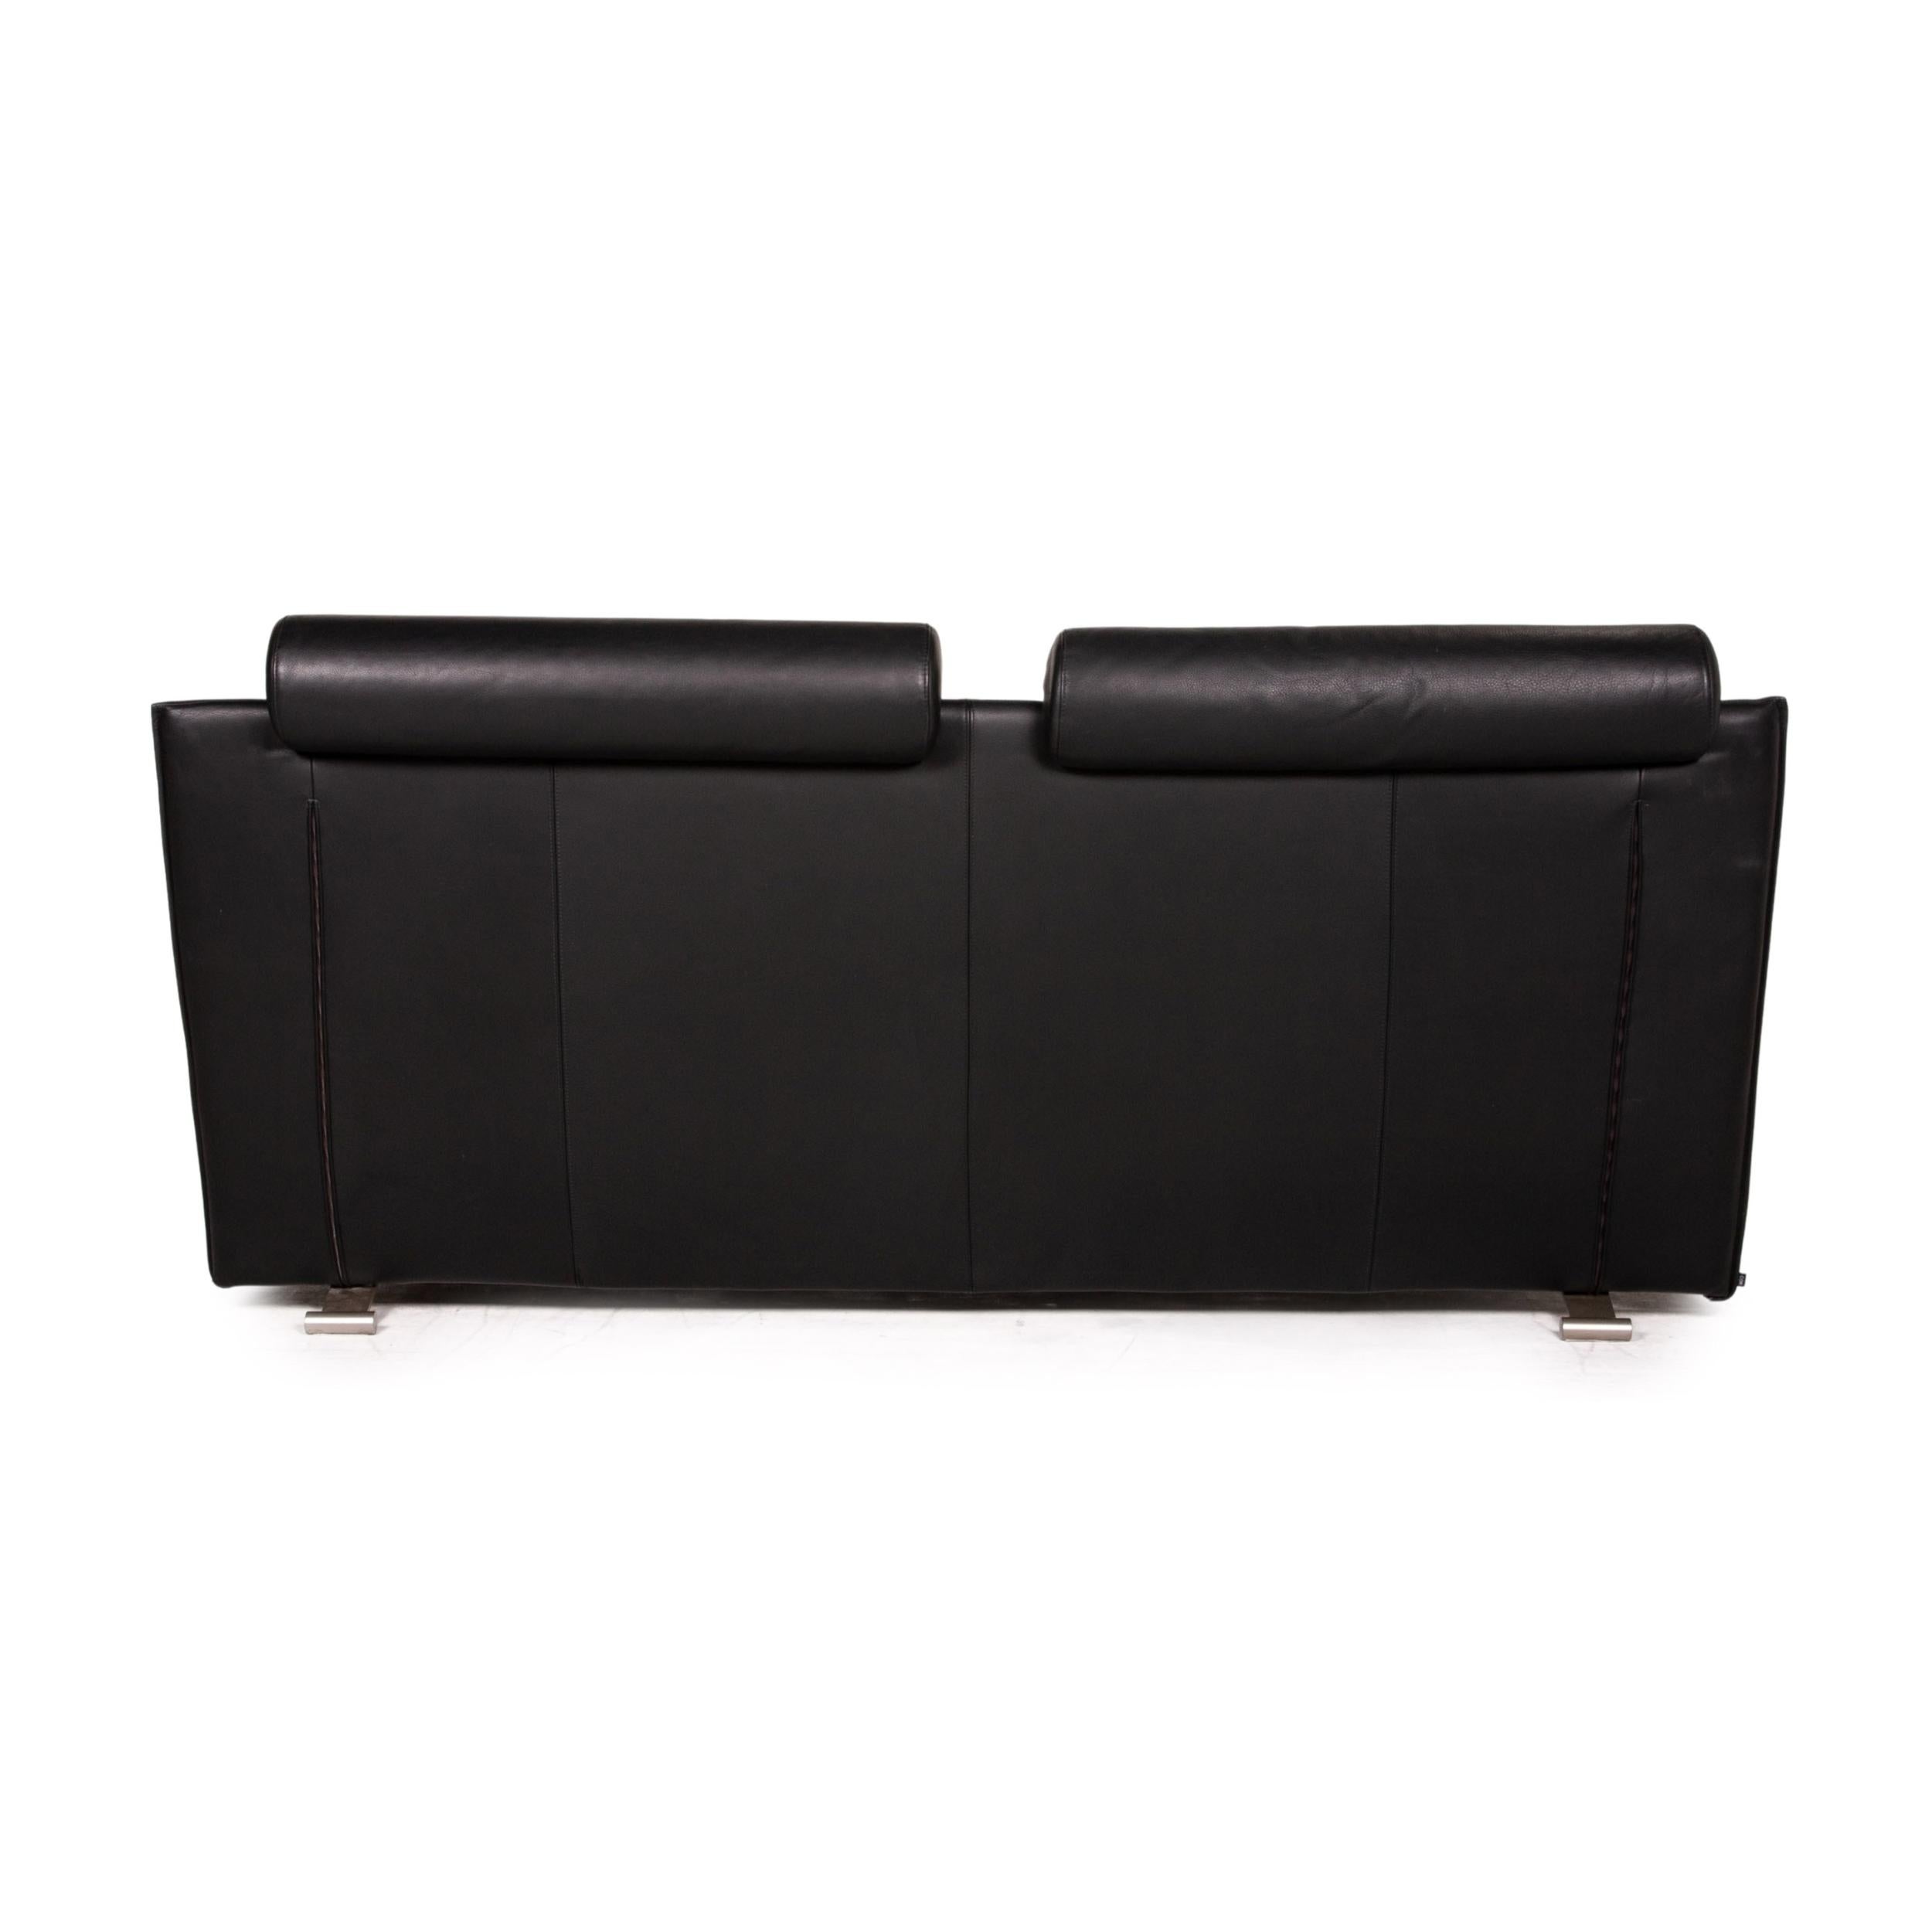 COR Sera Leather Sofa Black Two-Seater Function Couch For Sale 4